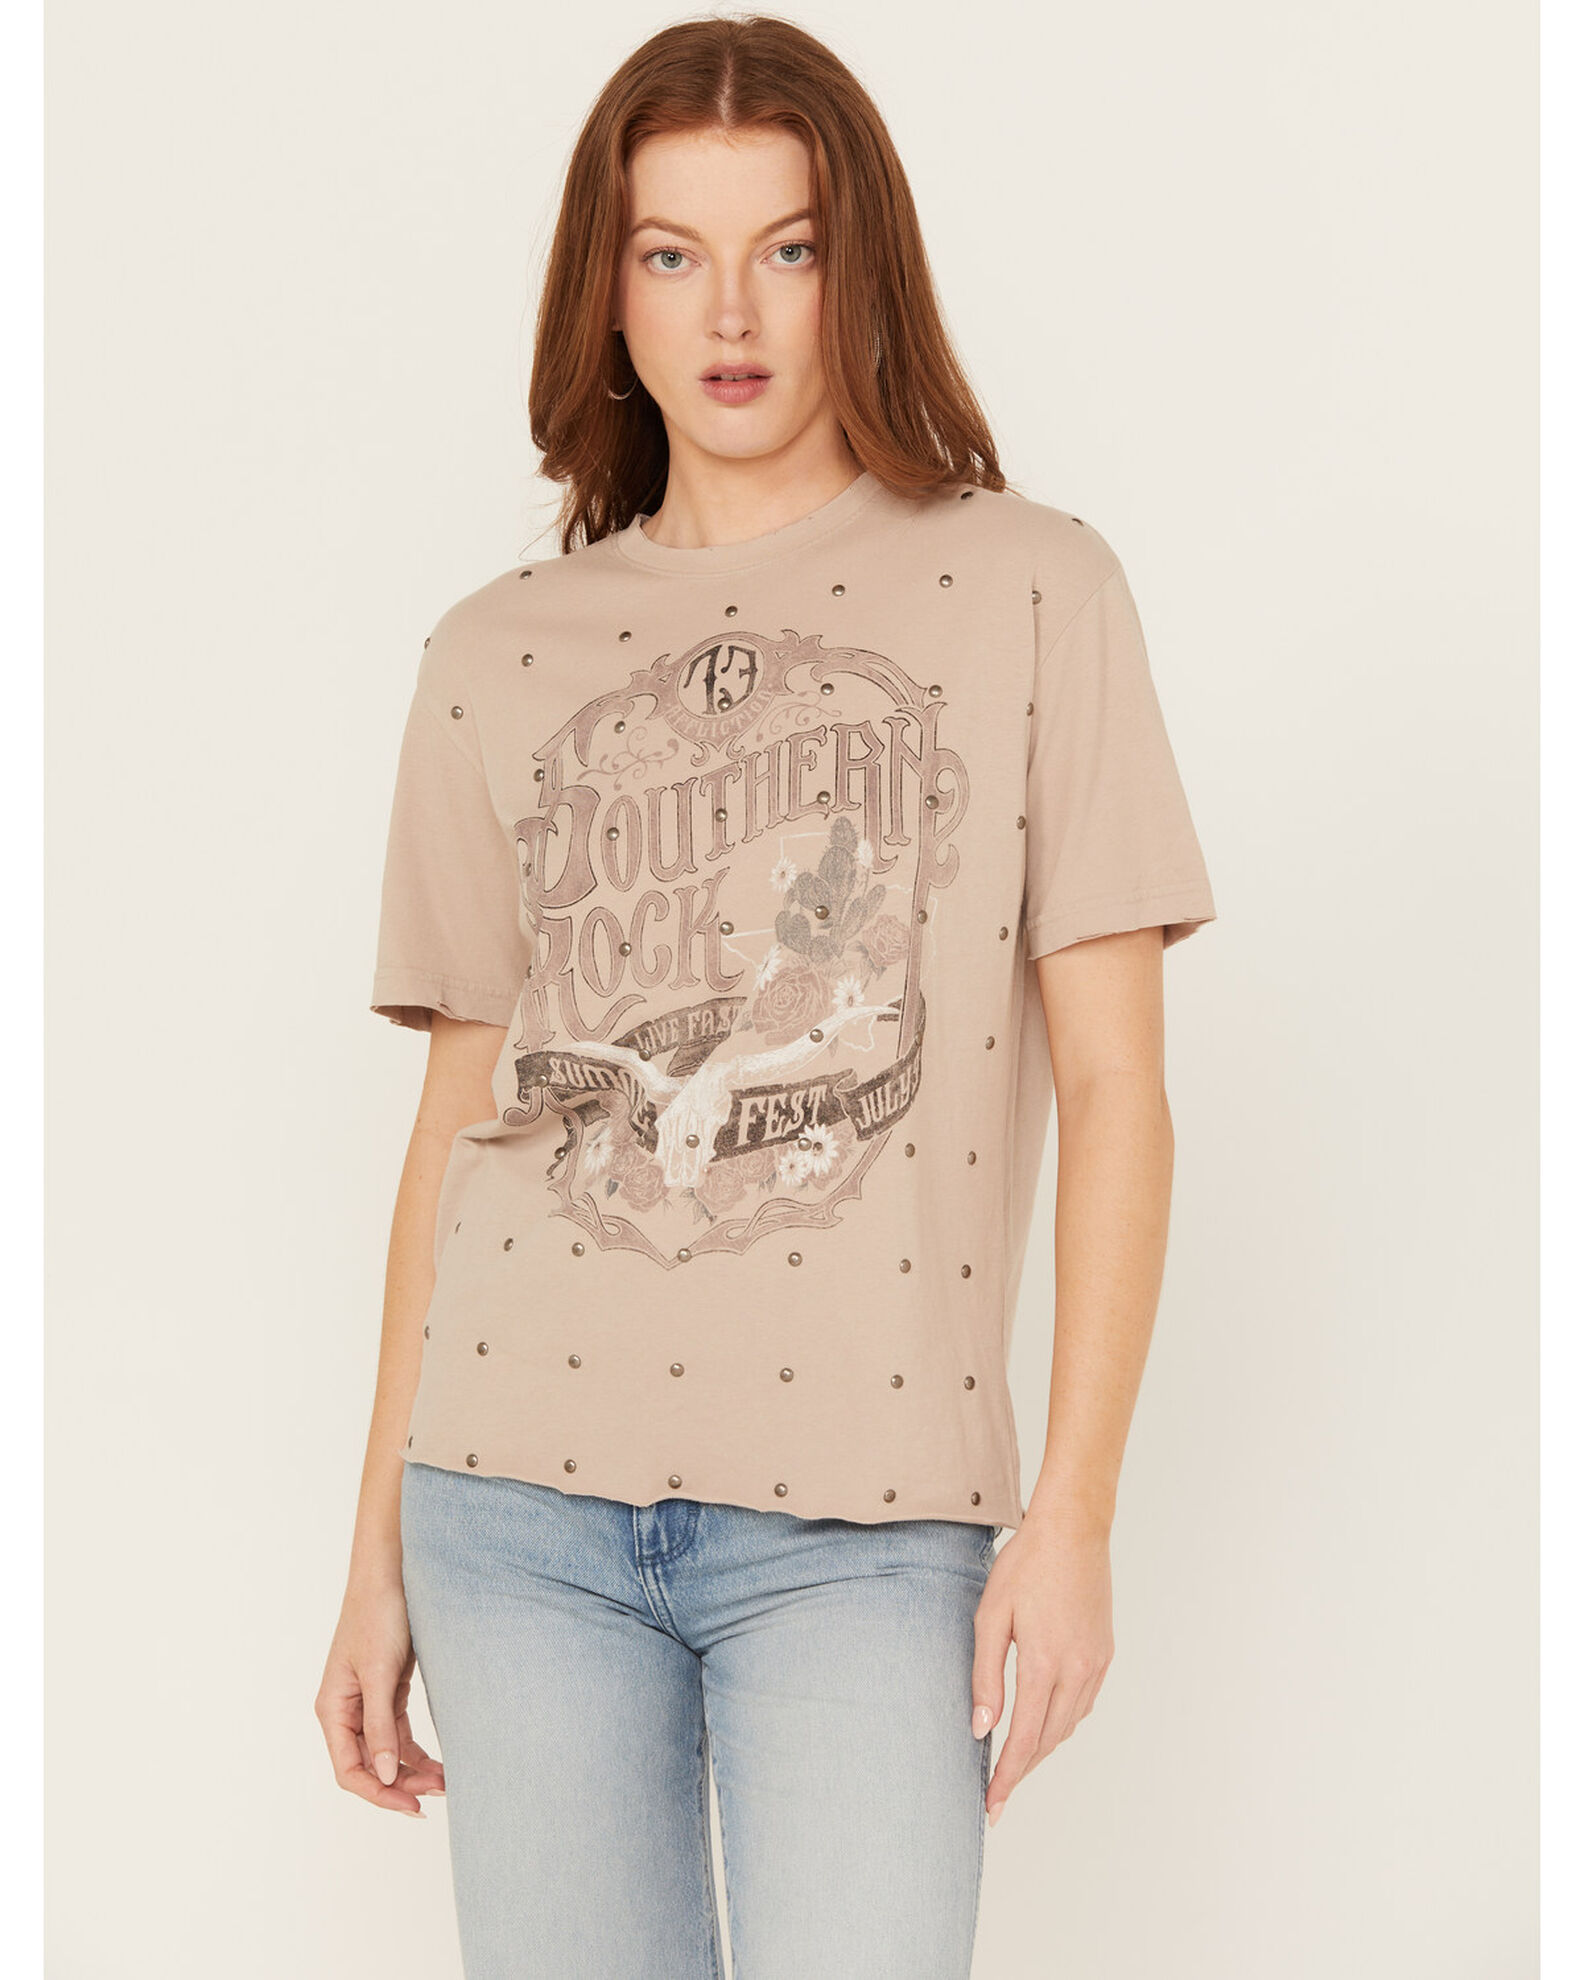 Affliction Women's Studded Southern Rock Graphic Tee